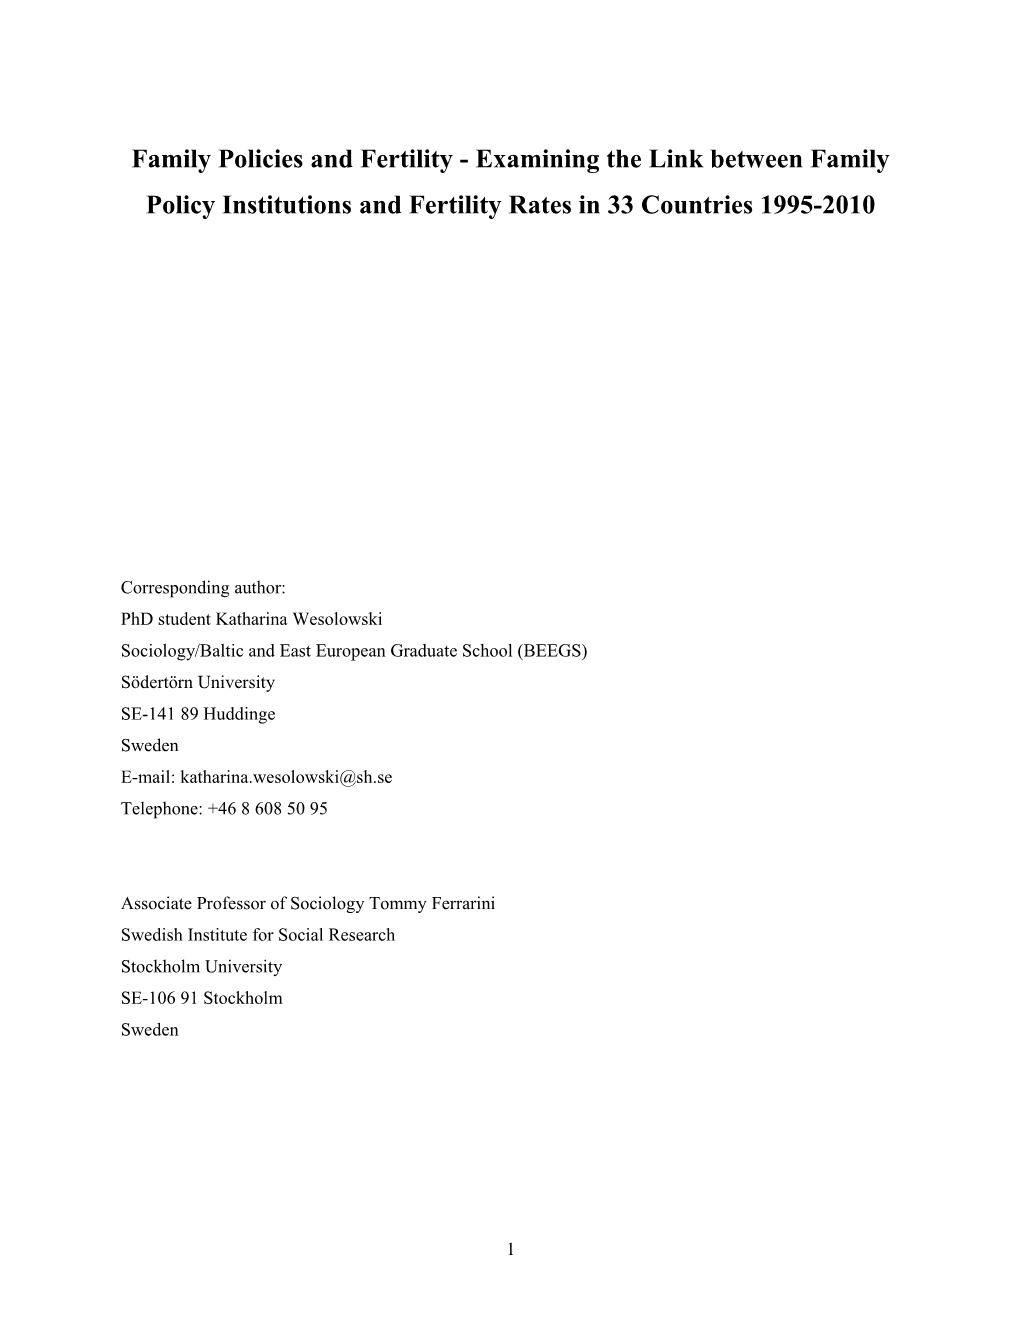 Family Policies and Fertility - Examining the Link Between Family Policy Institutions